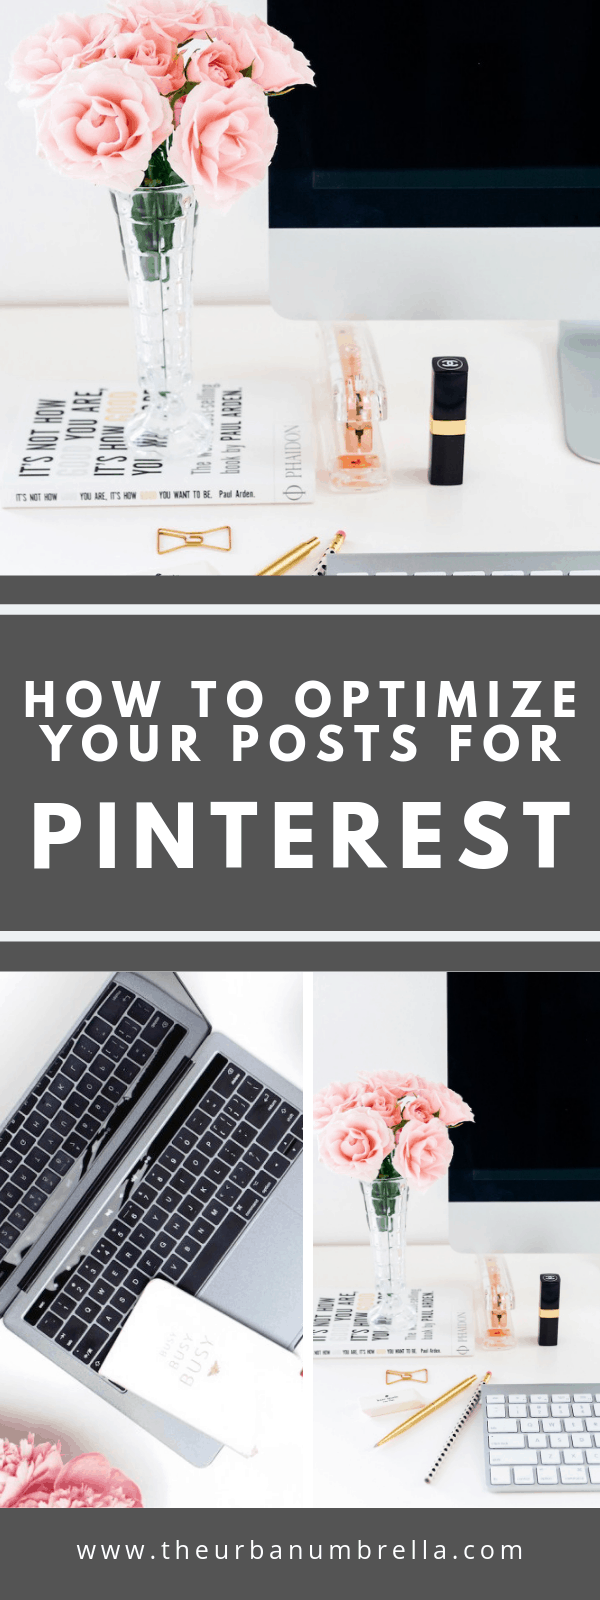 How to Optimize Your Blog Post Images for Pinterest